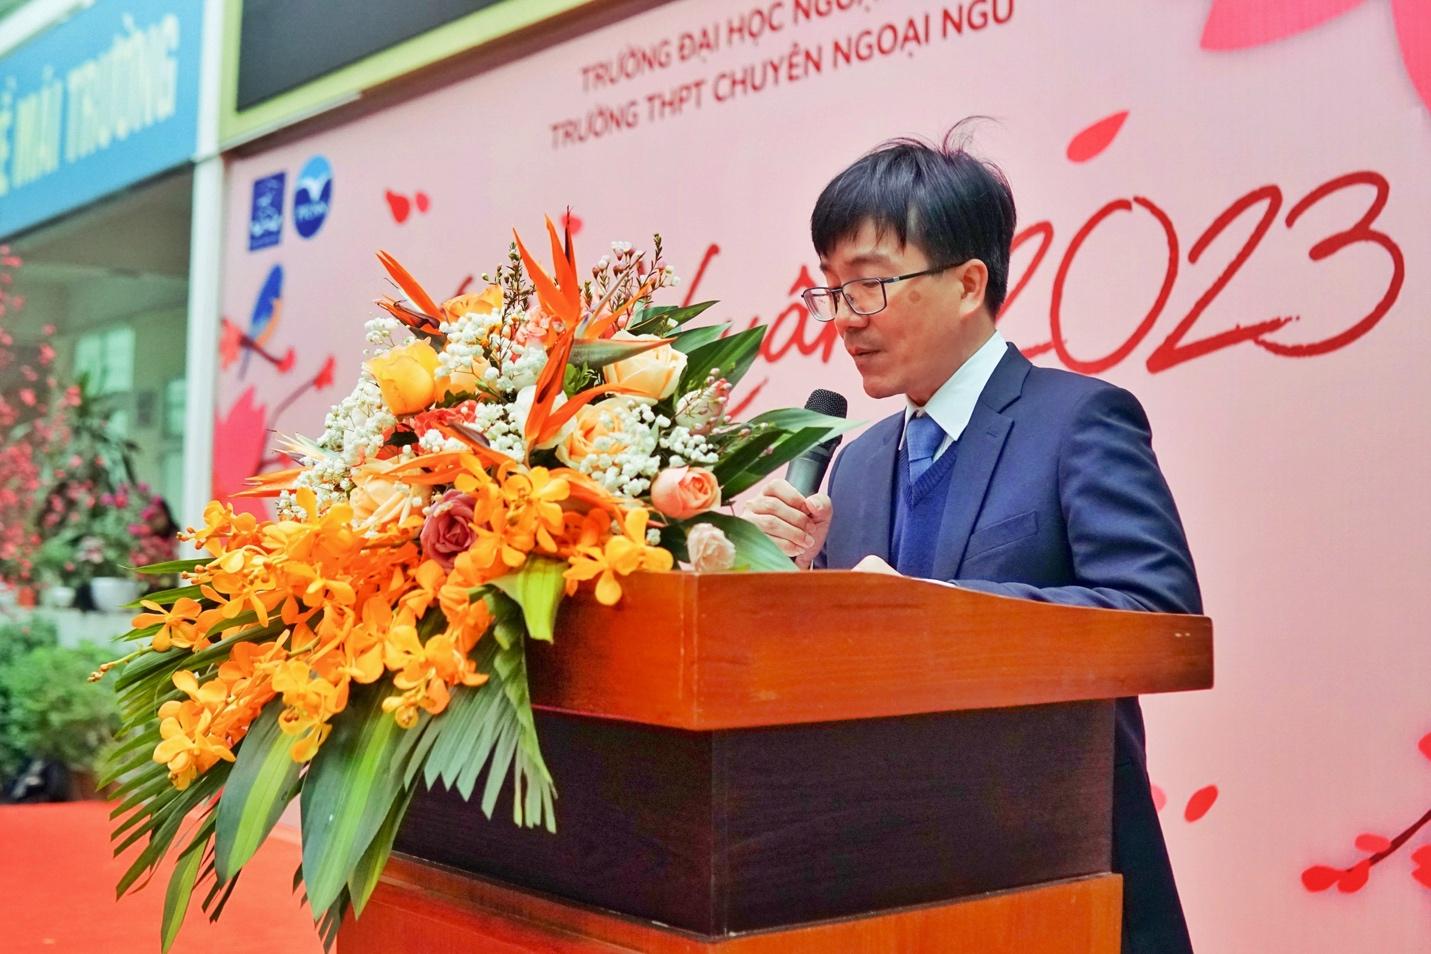 A person standing at a podium with a bouquet of flowers</p>
<p>Description automatically generated with medium confidence